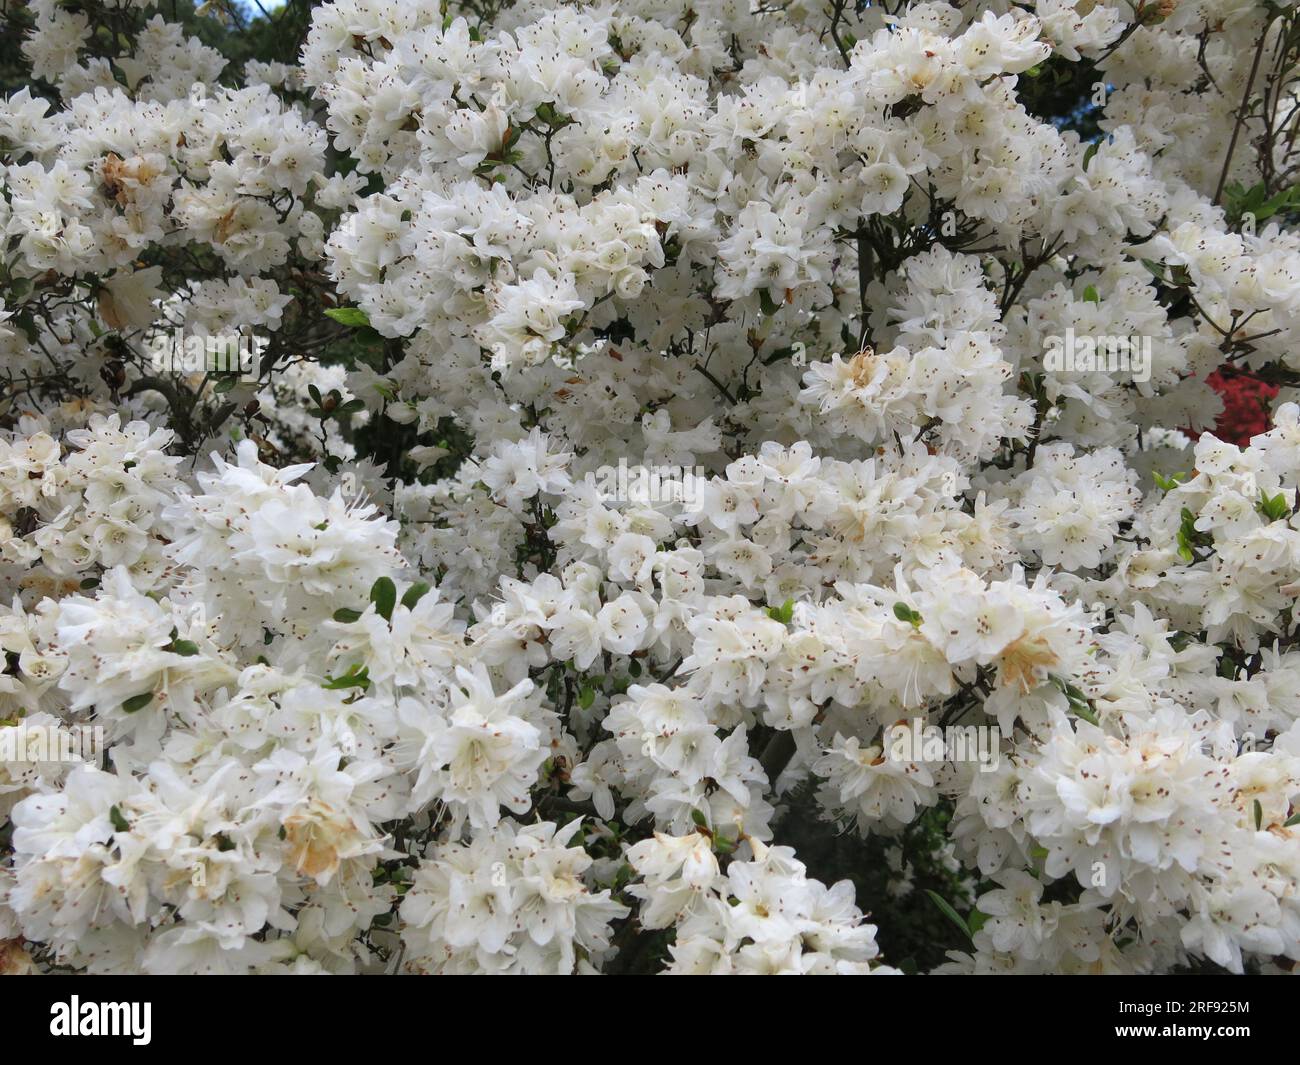 Late April in Japan and the azaleas are in full bloom; a close-up of a white variety in the gardens of the Meiji Shrine, Tokyo. Stock Photo